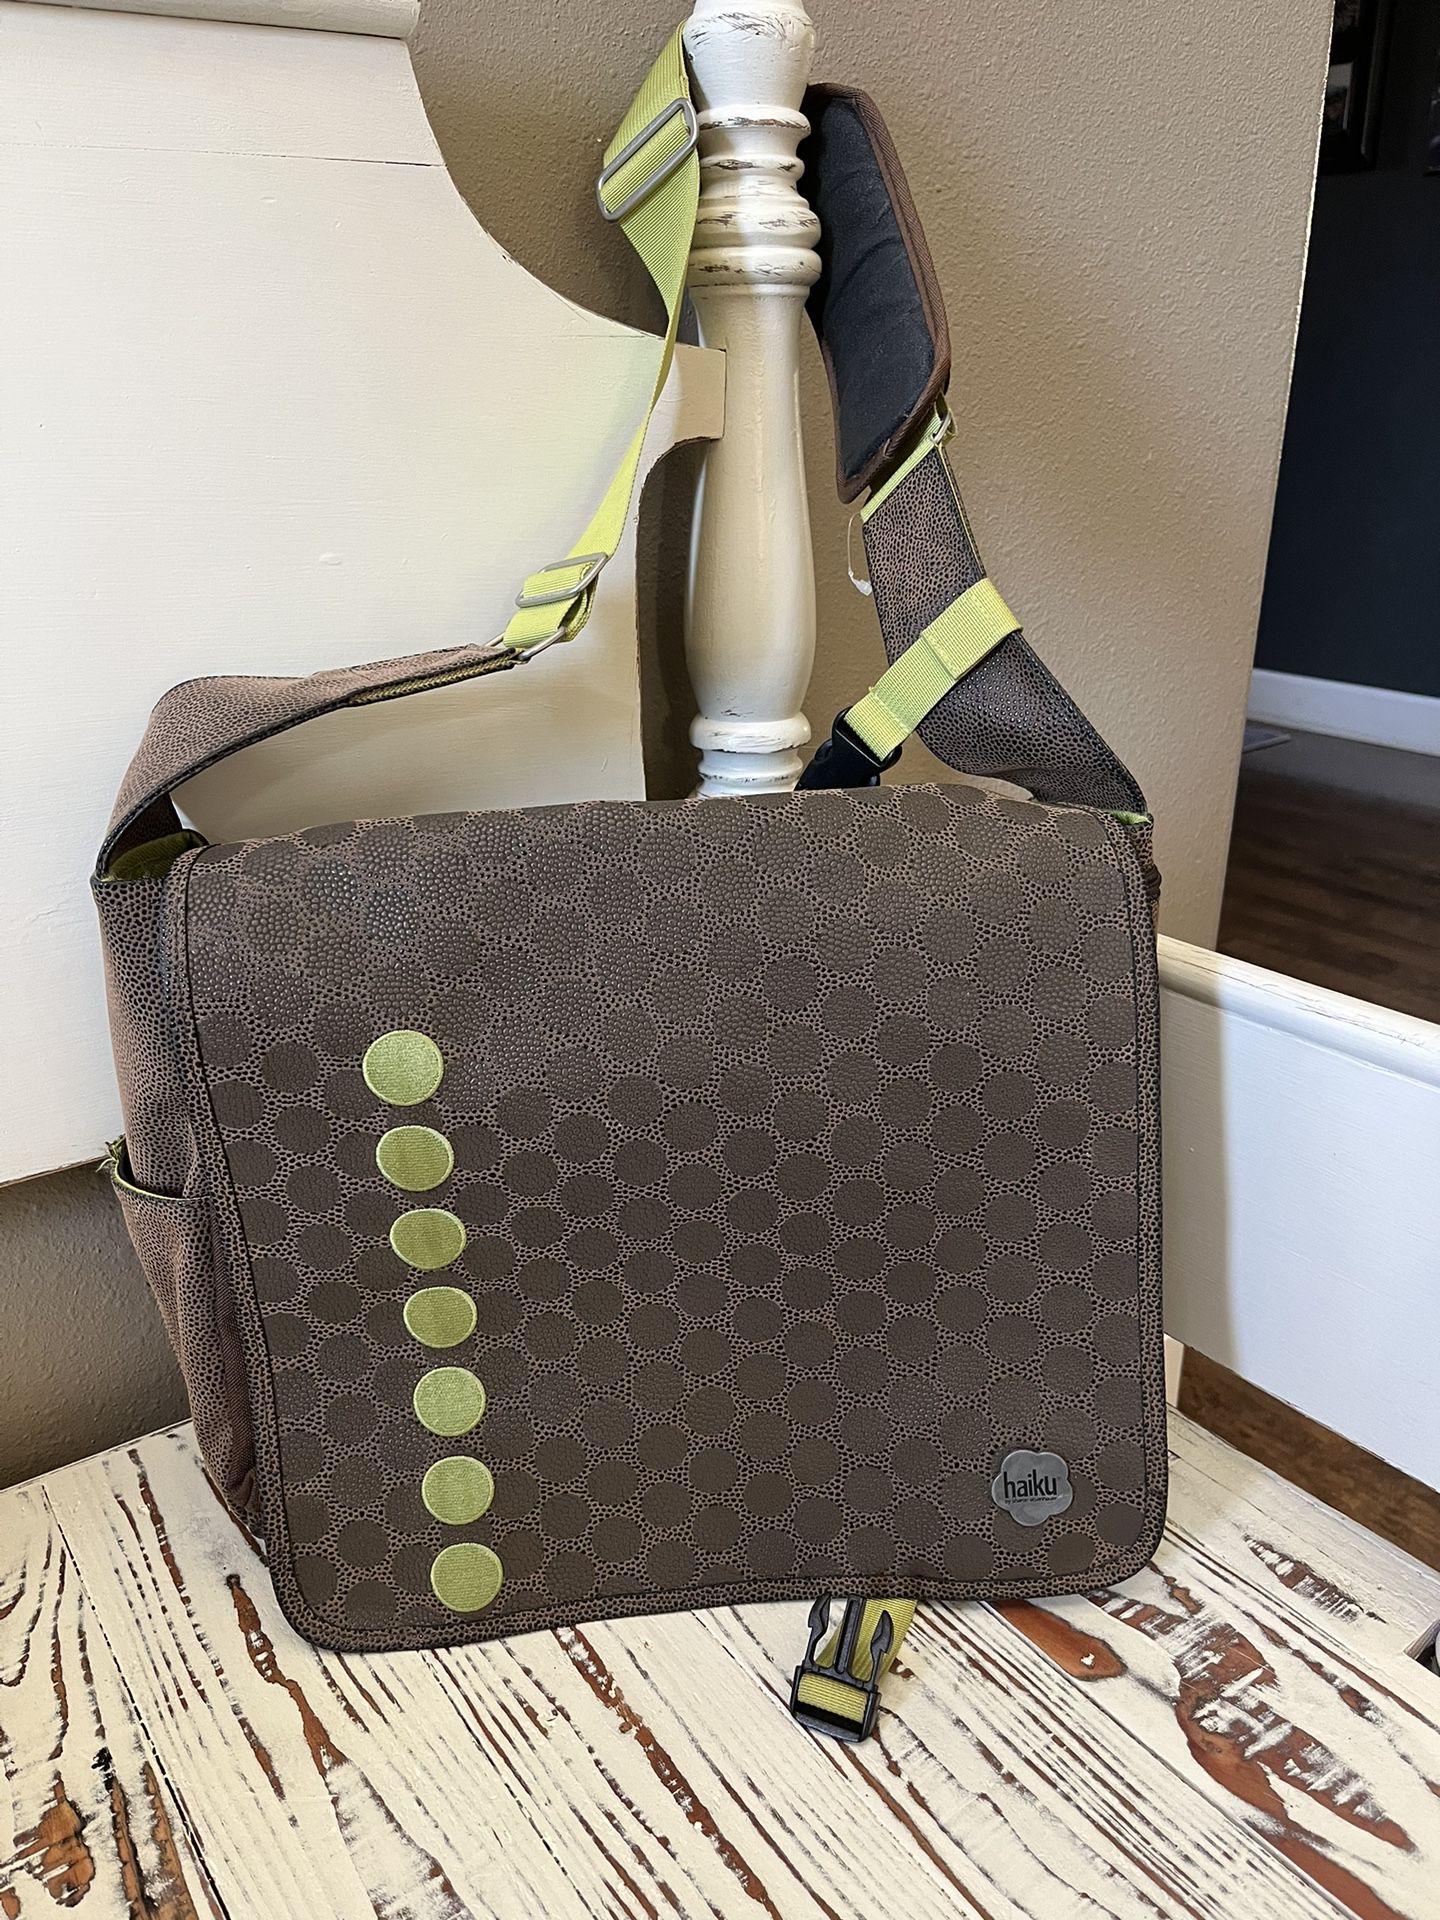 Timbuk2 Commute Messenger Bag - LIKE NEW for Sale in Portland, OR - OfferUp